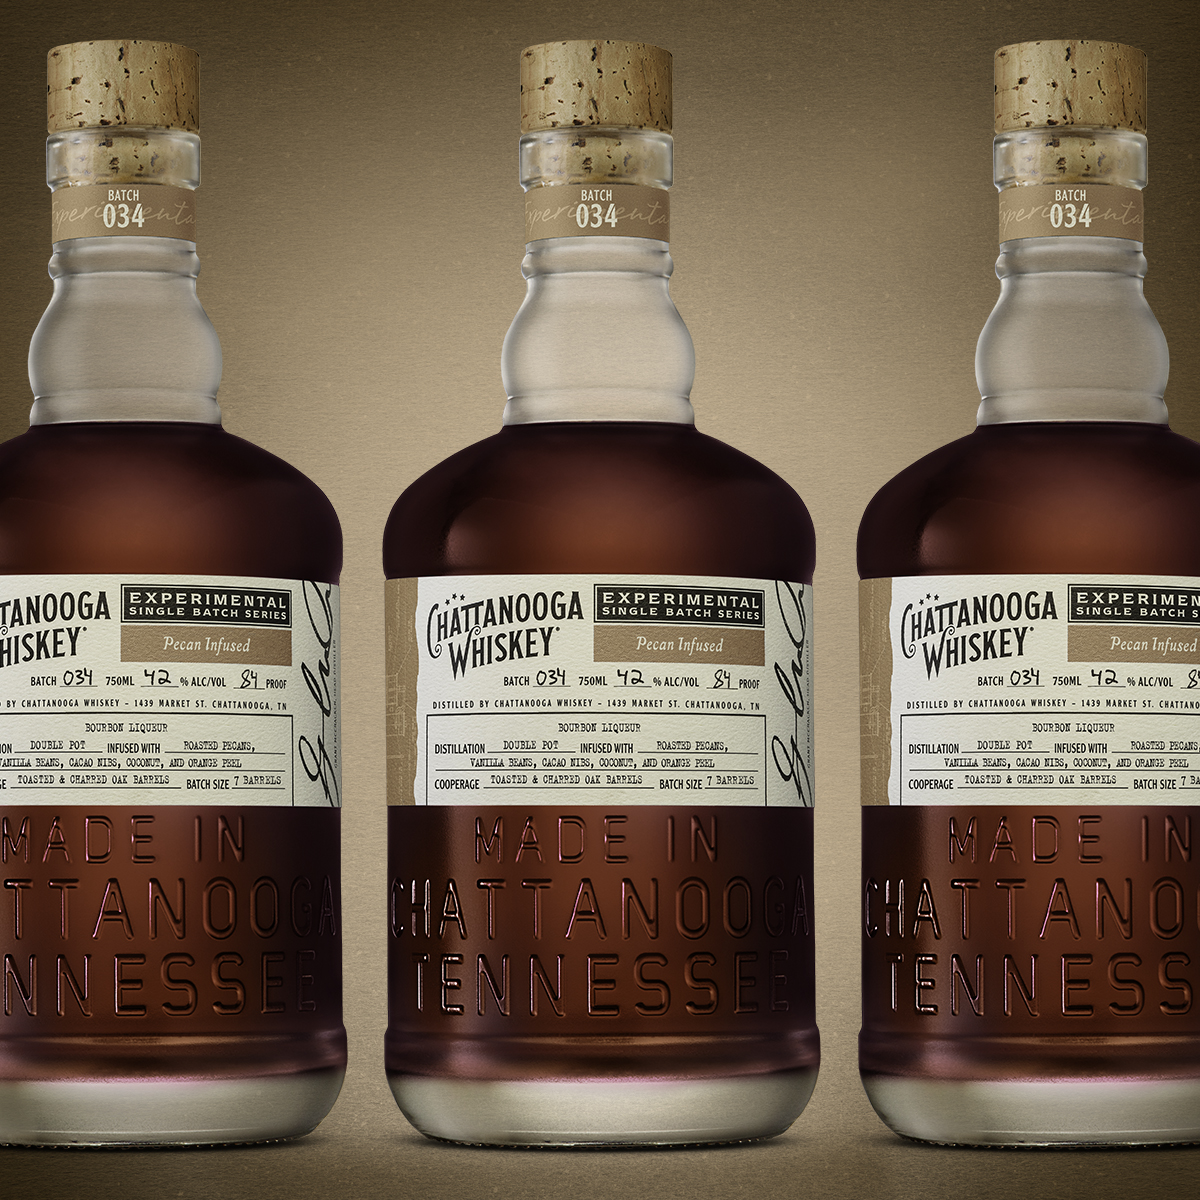 Chattanooga Whiskey Announces New Experimental Pecan Infused Whiskey Liqueur